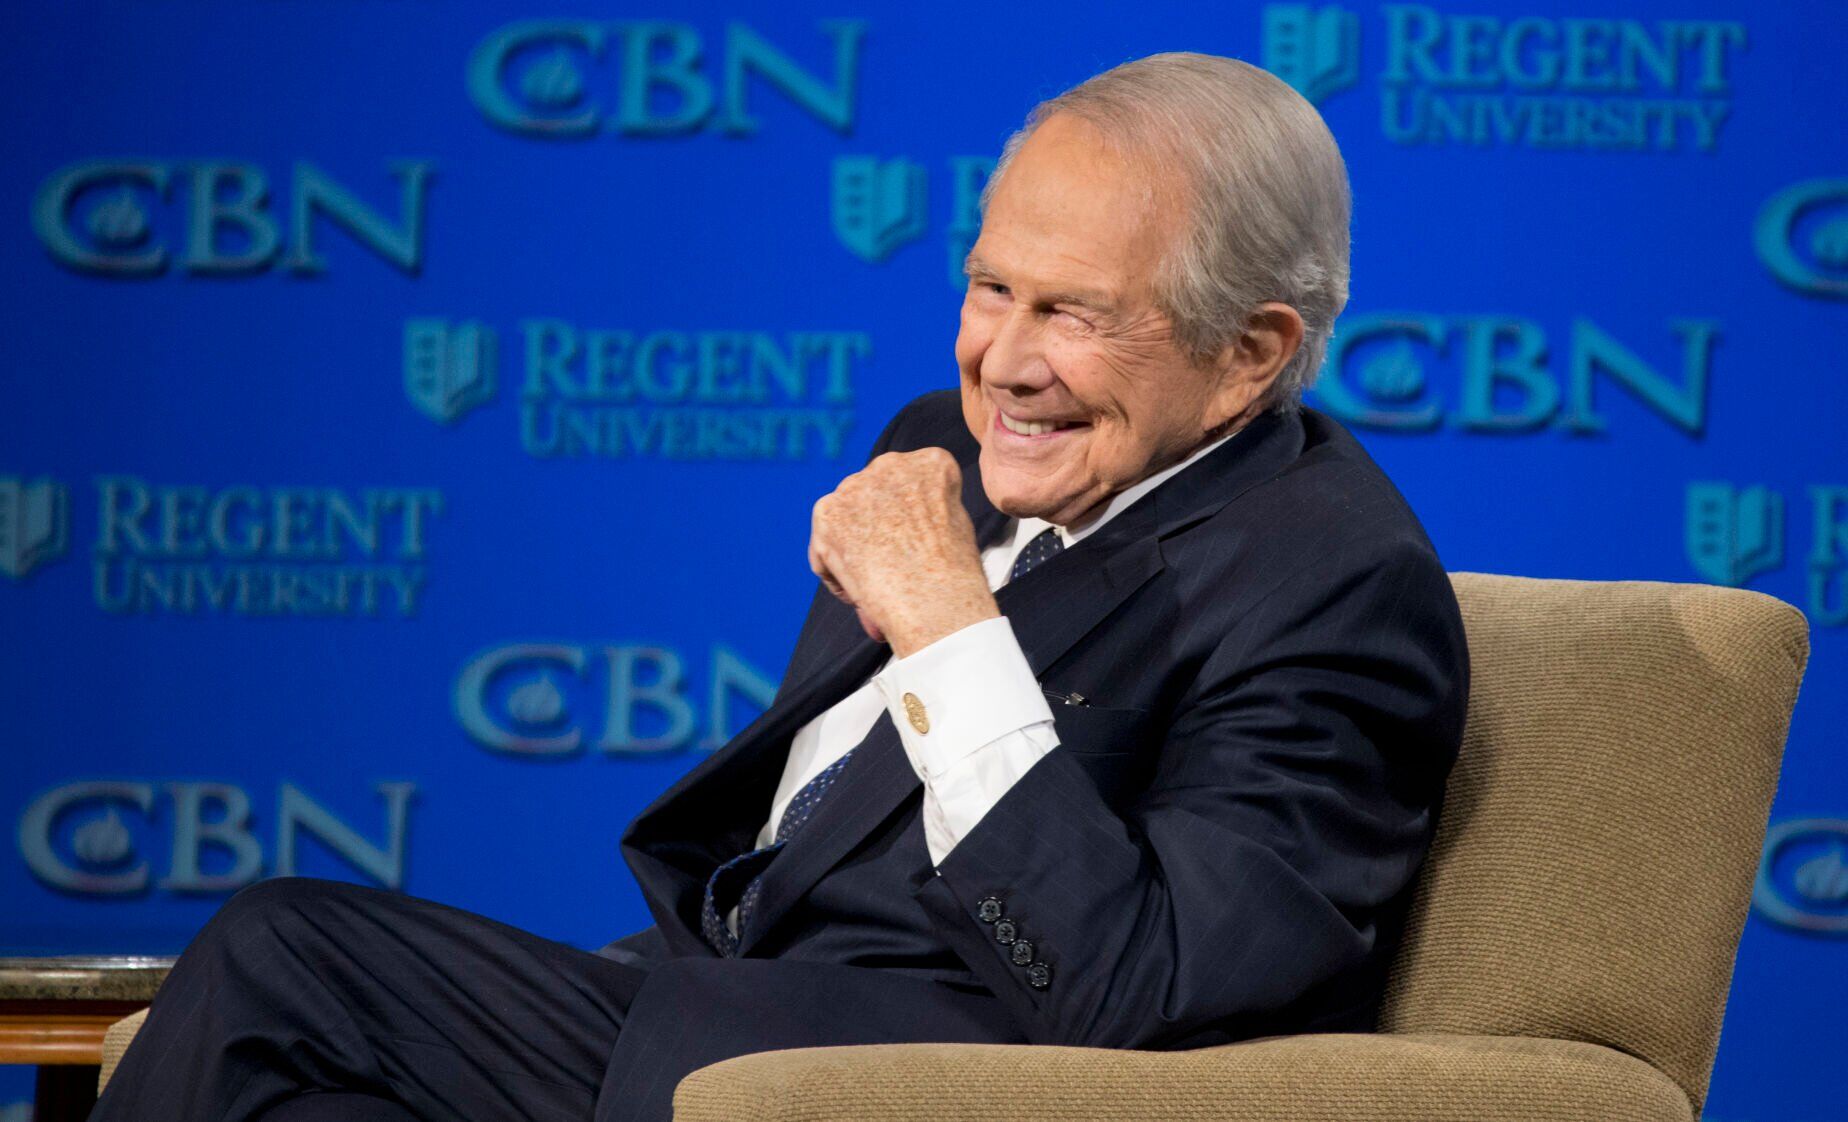 Pat Robertson, broadcaster who helped make religion central to GOP politics, dies at 93 pic